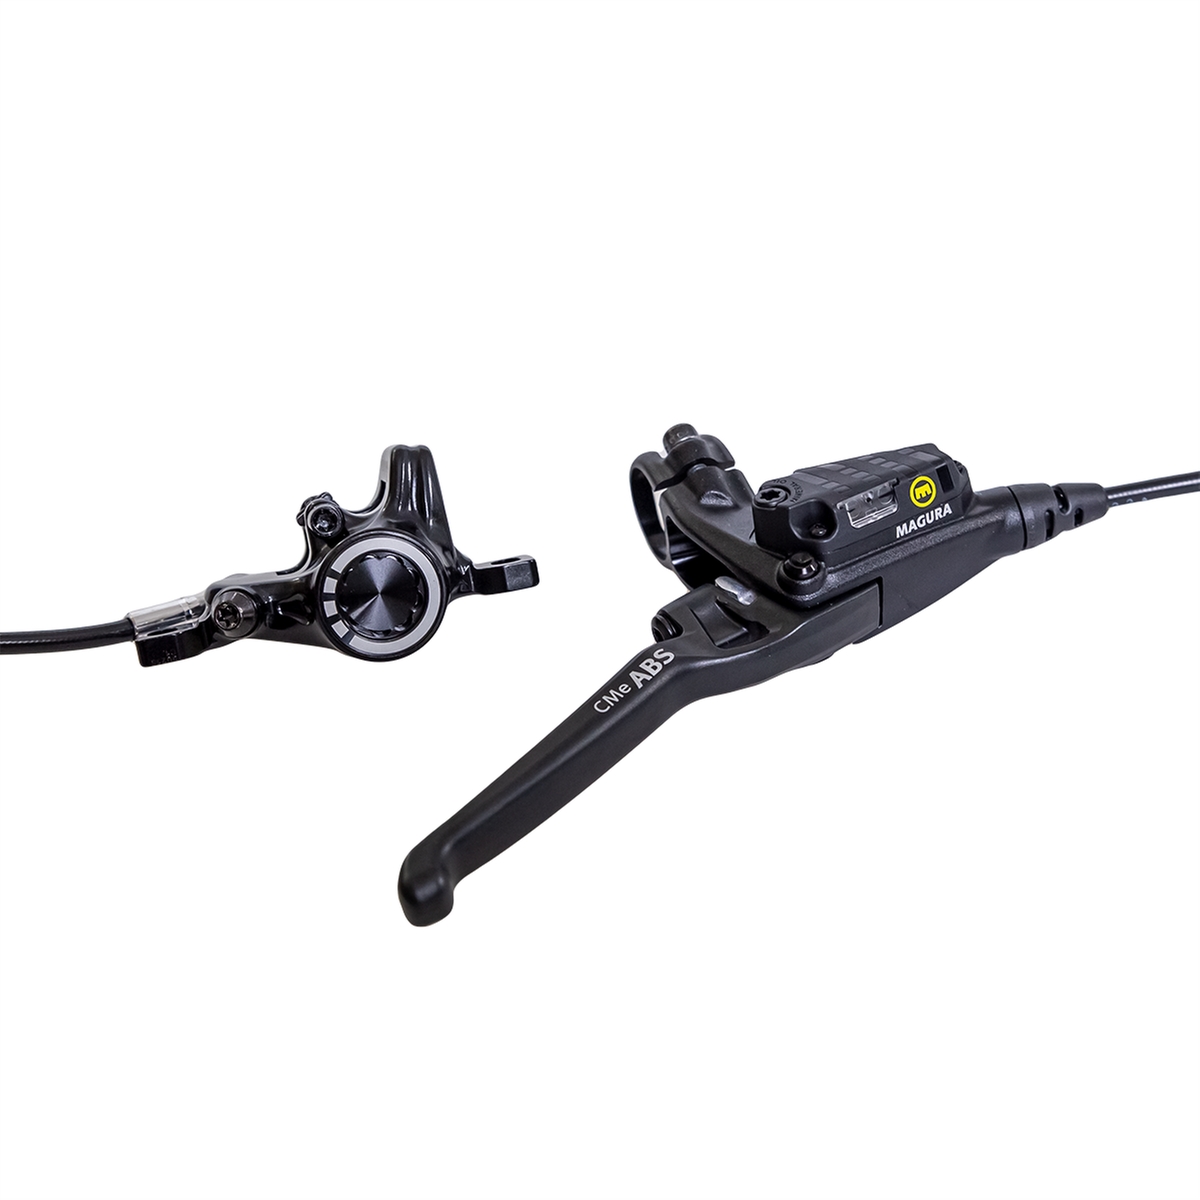 CMe ABS rear disc brake 4-finger aluminum lever with Ball-end